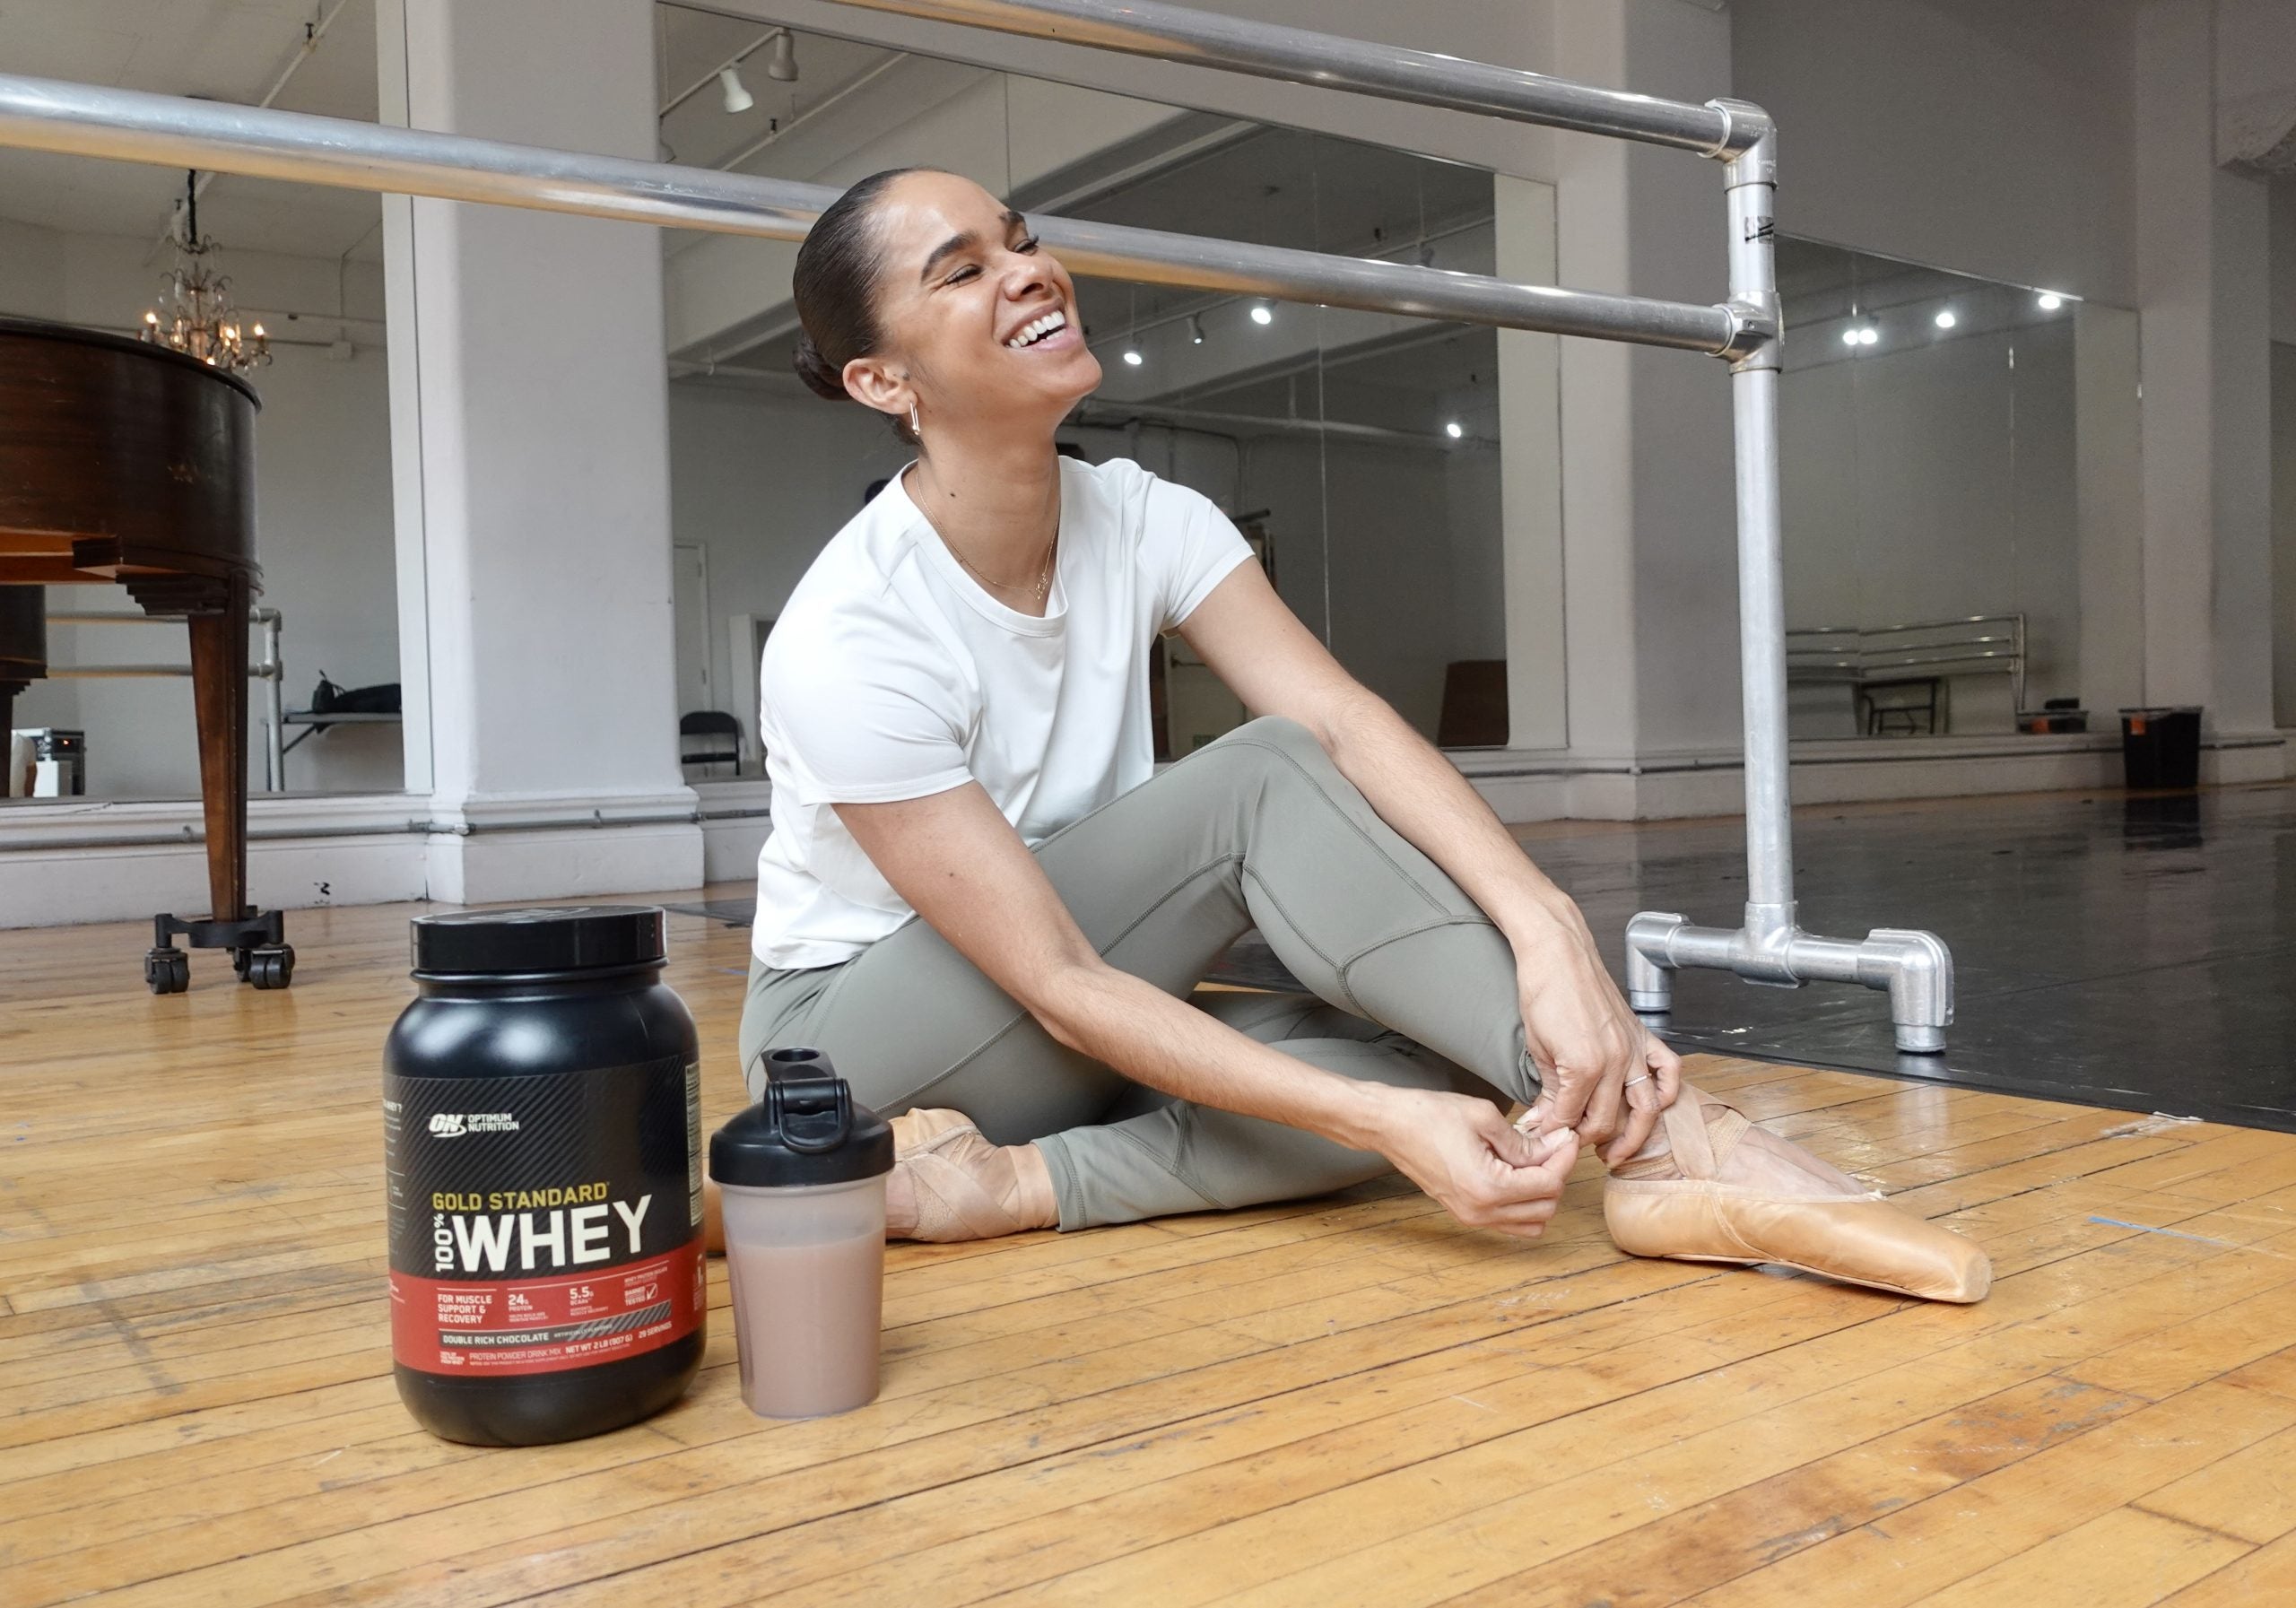 Misty Copeland Shares How She’s Able To Stick To Her New Year’s Resolutions Thanks To Protein